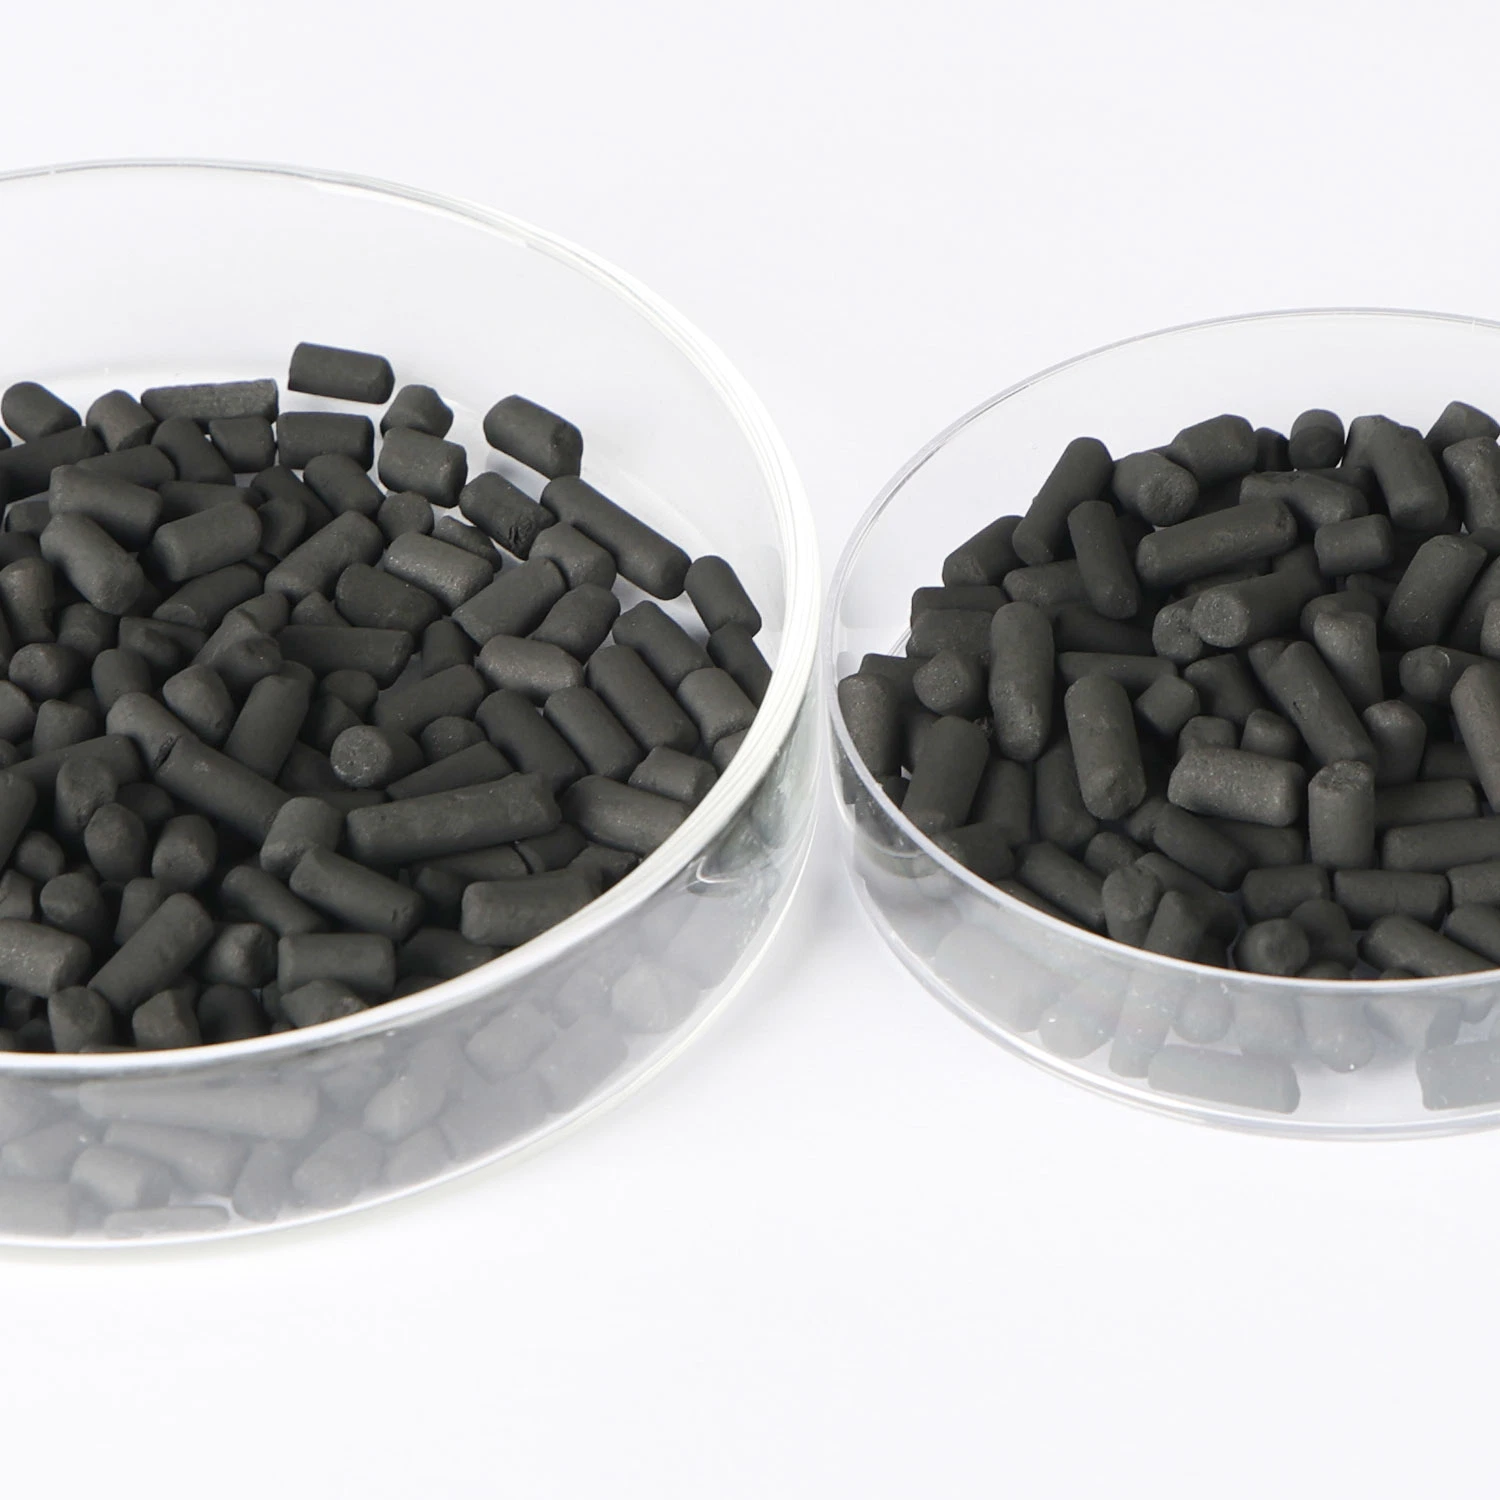 4 mm Diameter Available Particle Size Black Coconut Shell Columnar Activated Carbon Possessing Low Ash